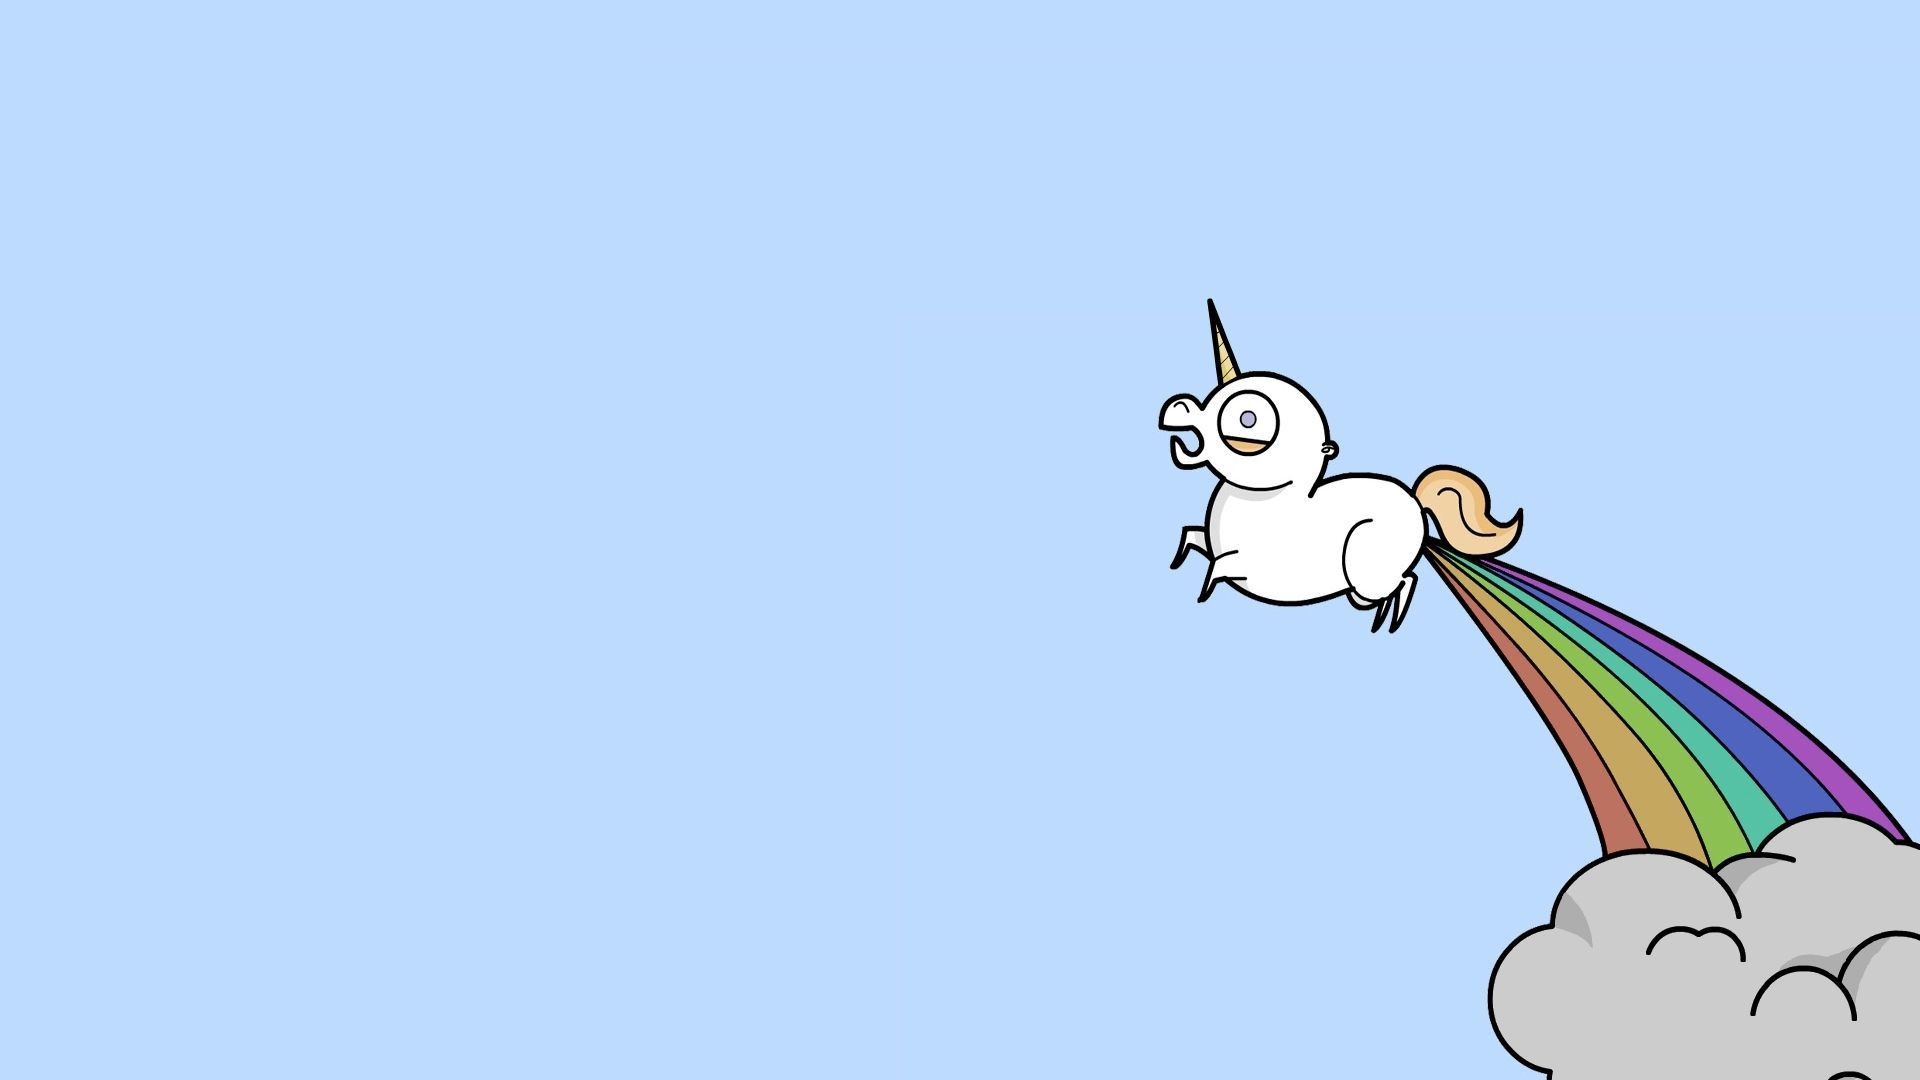 1920x1080 Related Wallpapers HD. Animated Unicorn Wallpaper Mobile